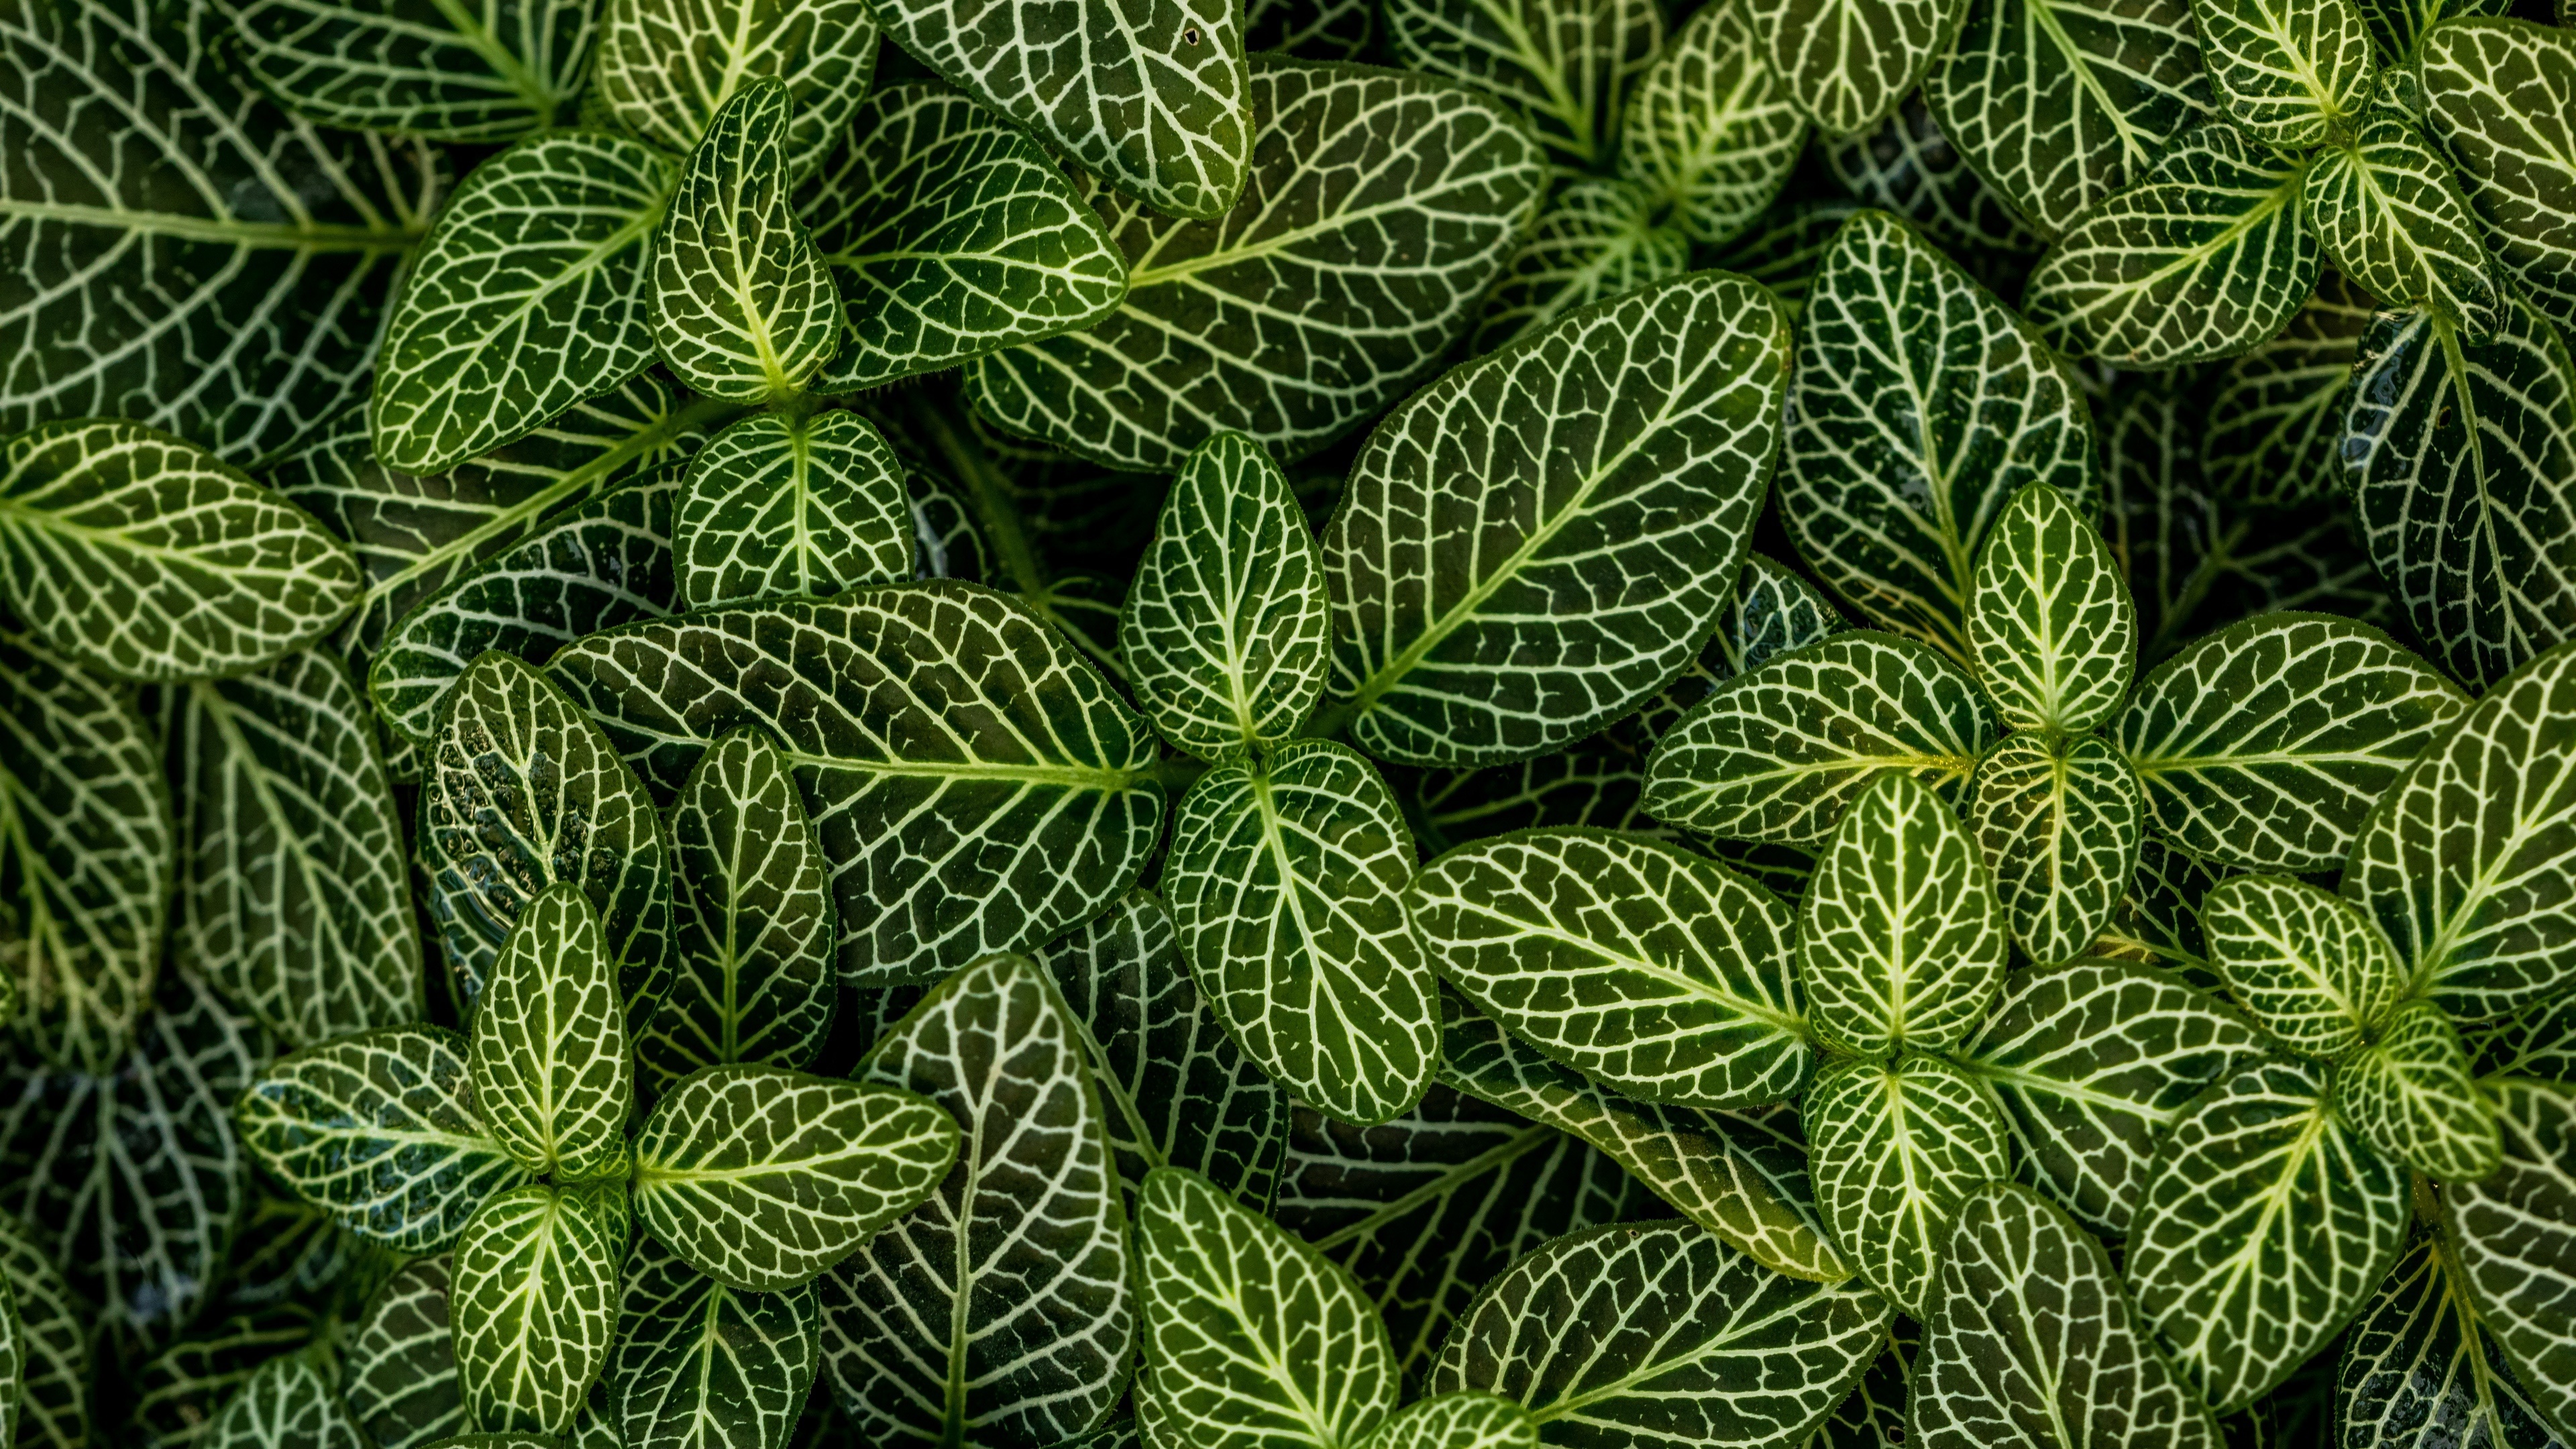 Green Leaf: Fittonia albivenis, A species of flowering plant, native to the rainforests of Colombia, Peru, Bolivia, Ecuador, and northern Brazil. 3840x2160 4K Wallpaper.